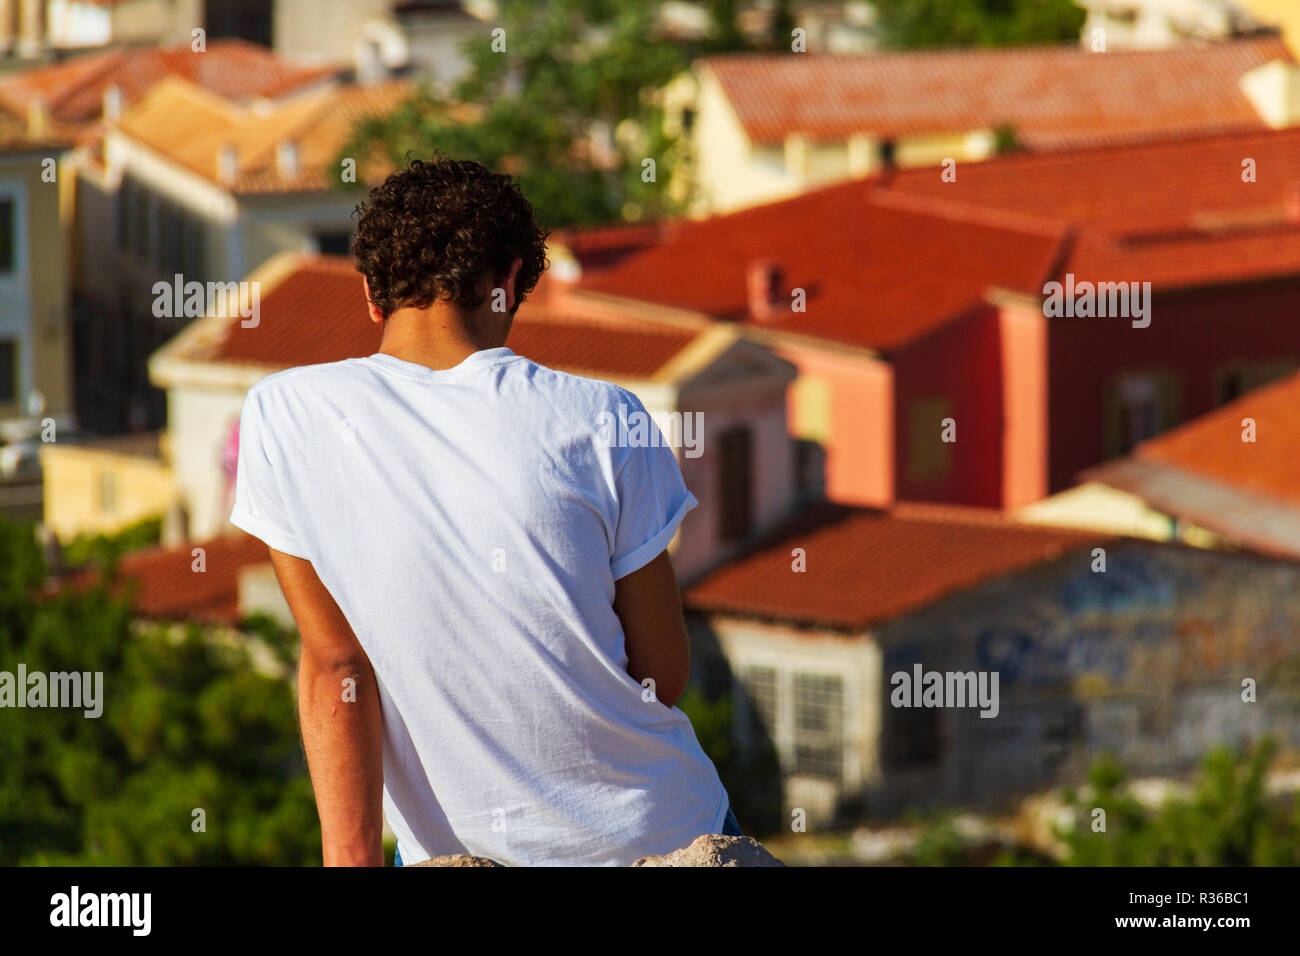 Athens, Greece - June 9, 2018: A young man sitting on a rock opposite the Acropolis of Athens is gazing towards the city buildings below Stock Photo